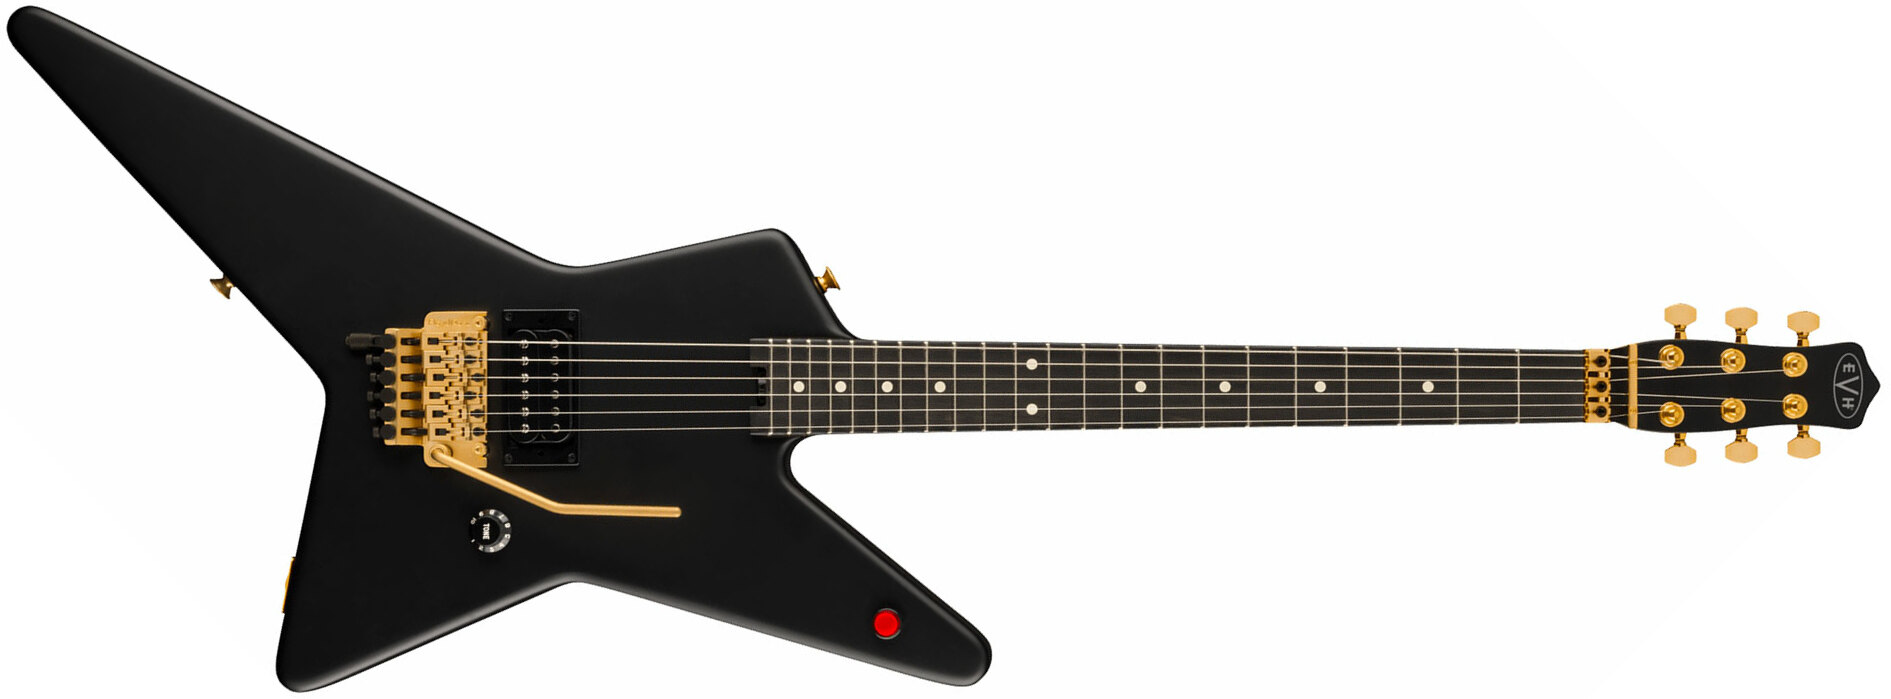 Evh Star Limited Edition 1h Fr Eb - Stealth Black With Gold Hardware - Metal electric guitar - Main picture